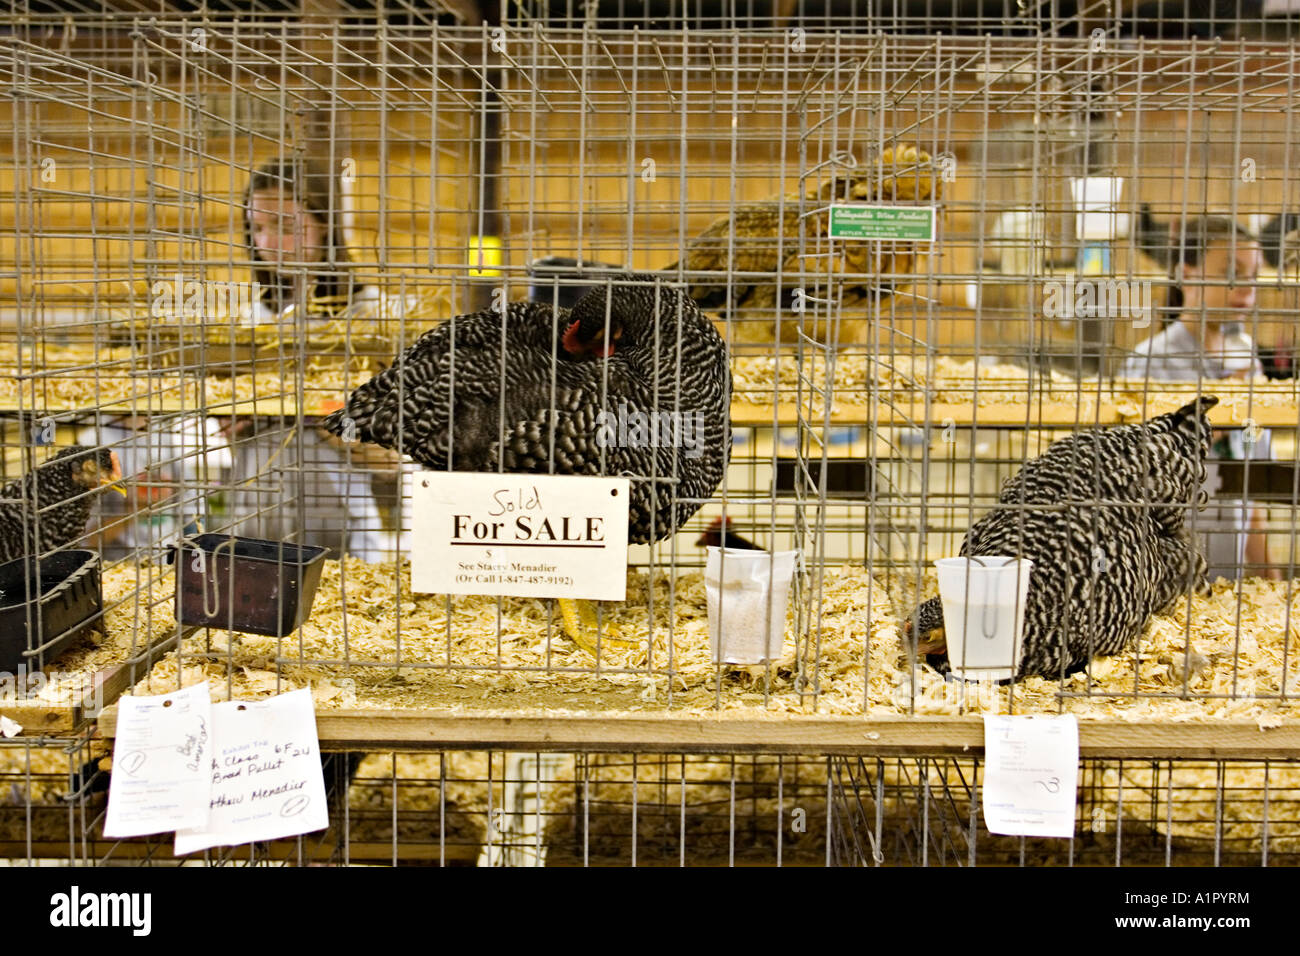 Poultry Show Cages High Resolution Stock Photography and Images - Alamy